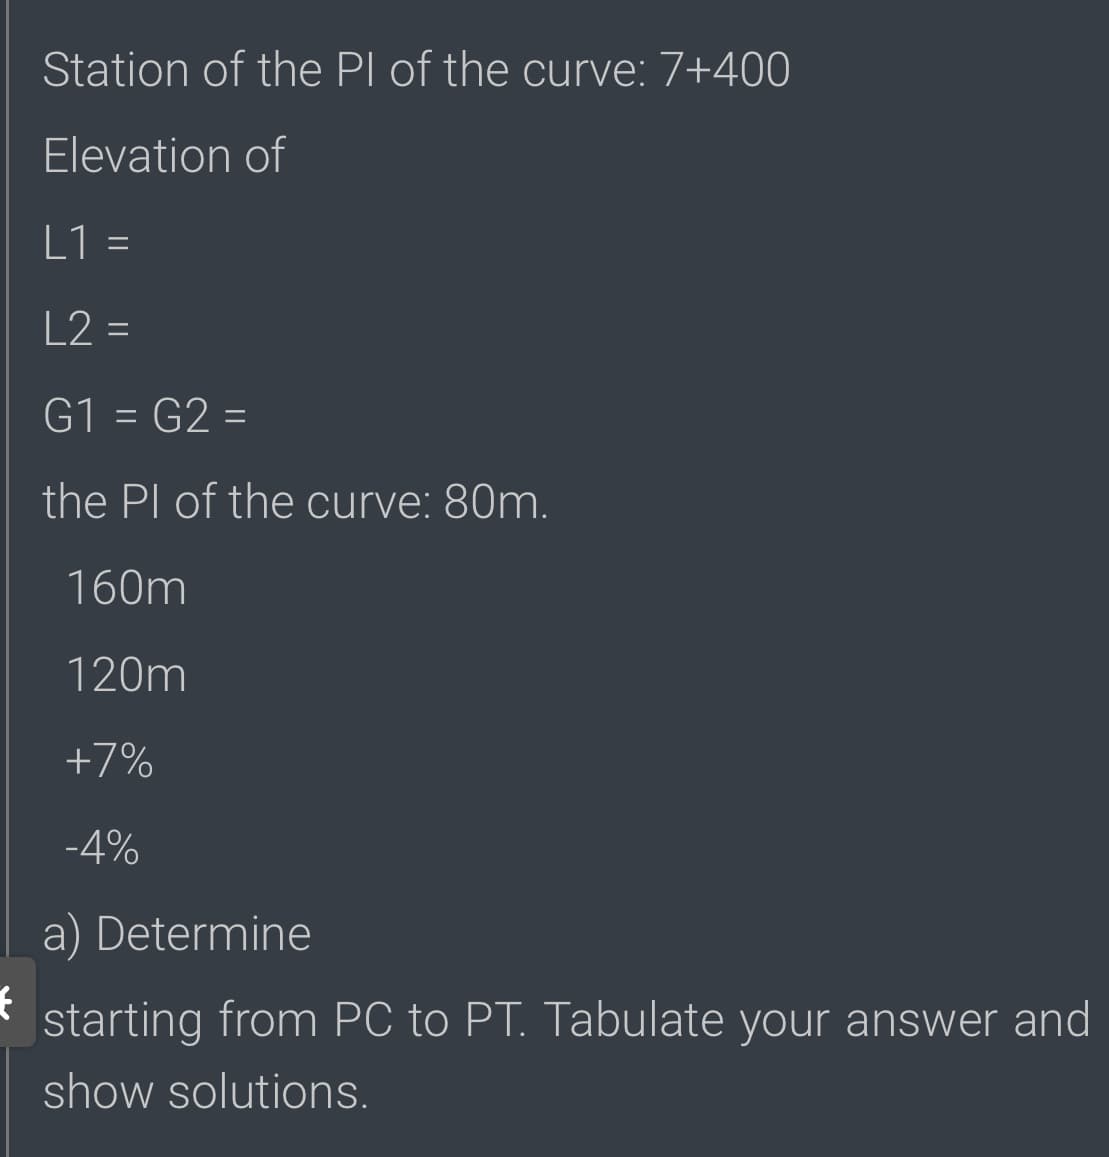 Station of the Pl of the curve: 7+400
Elevation of
L1 =
L2 =
G1 = G2 =
the Pl of the curve: 80m.
160m
120m
+7%
-4%
a) Determine
starting from PC to PT. Tabulate your answer and
show solutions.
